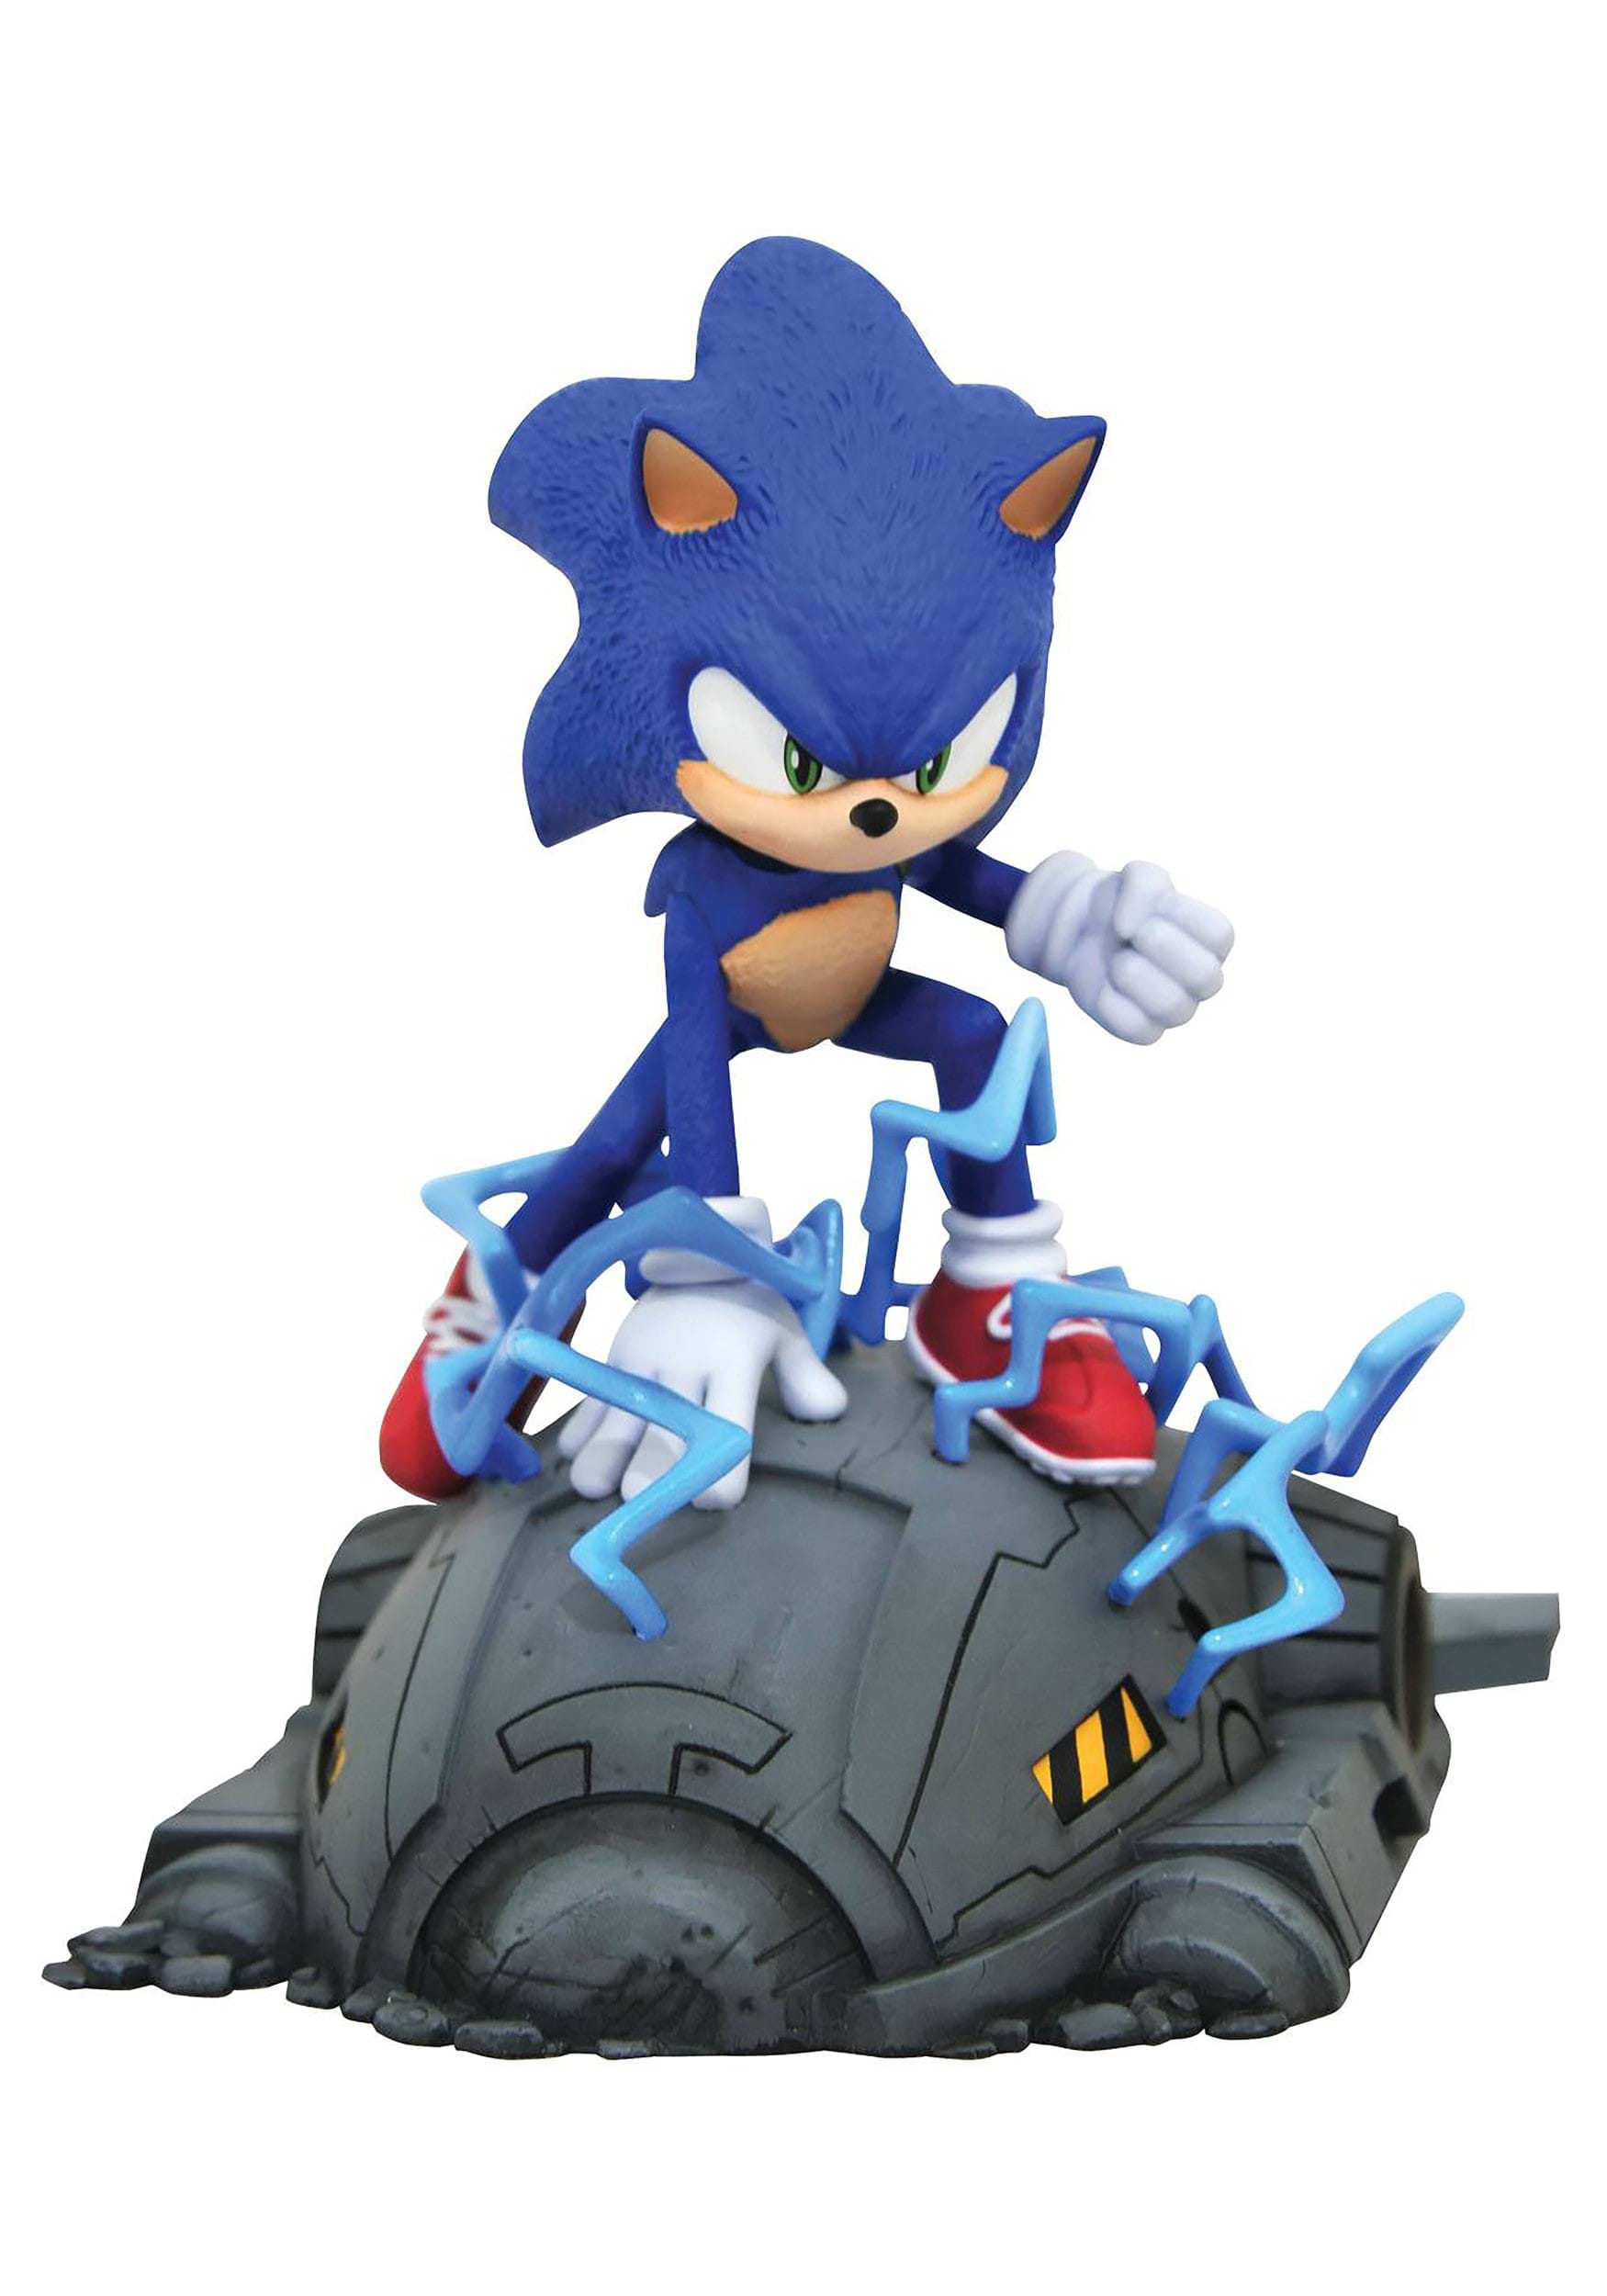 Diamond Select Sonic the Hedgehog Movie Gallery PV 5 in Statue